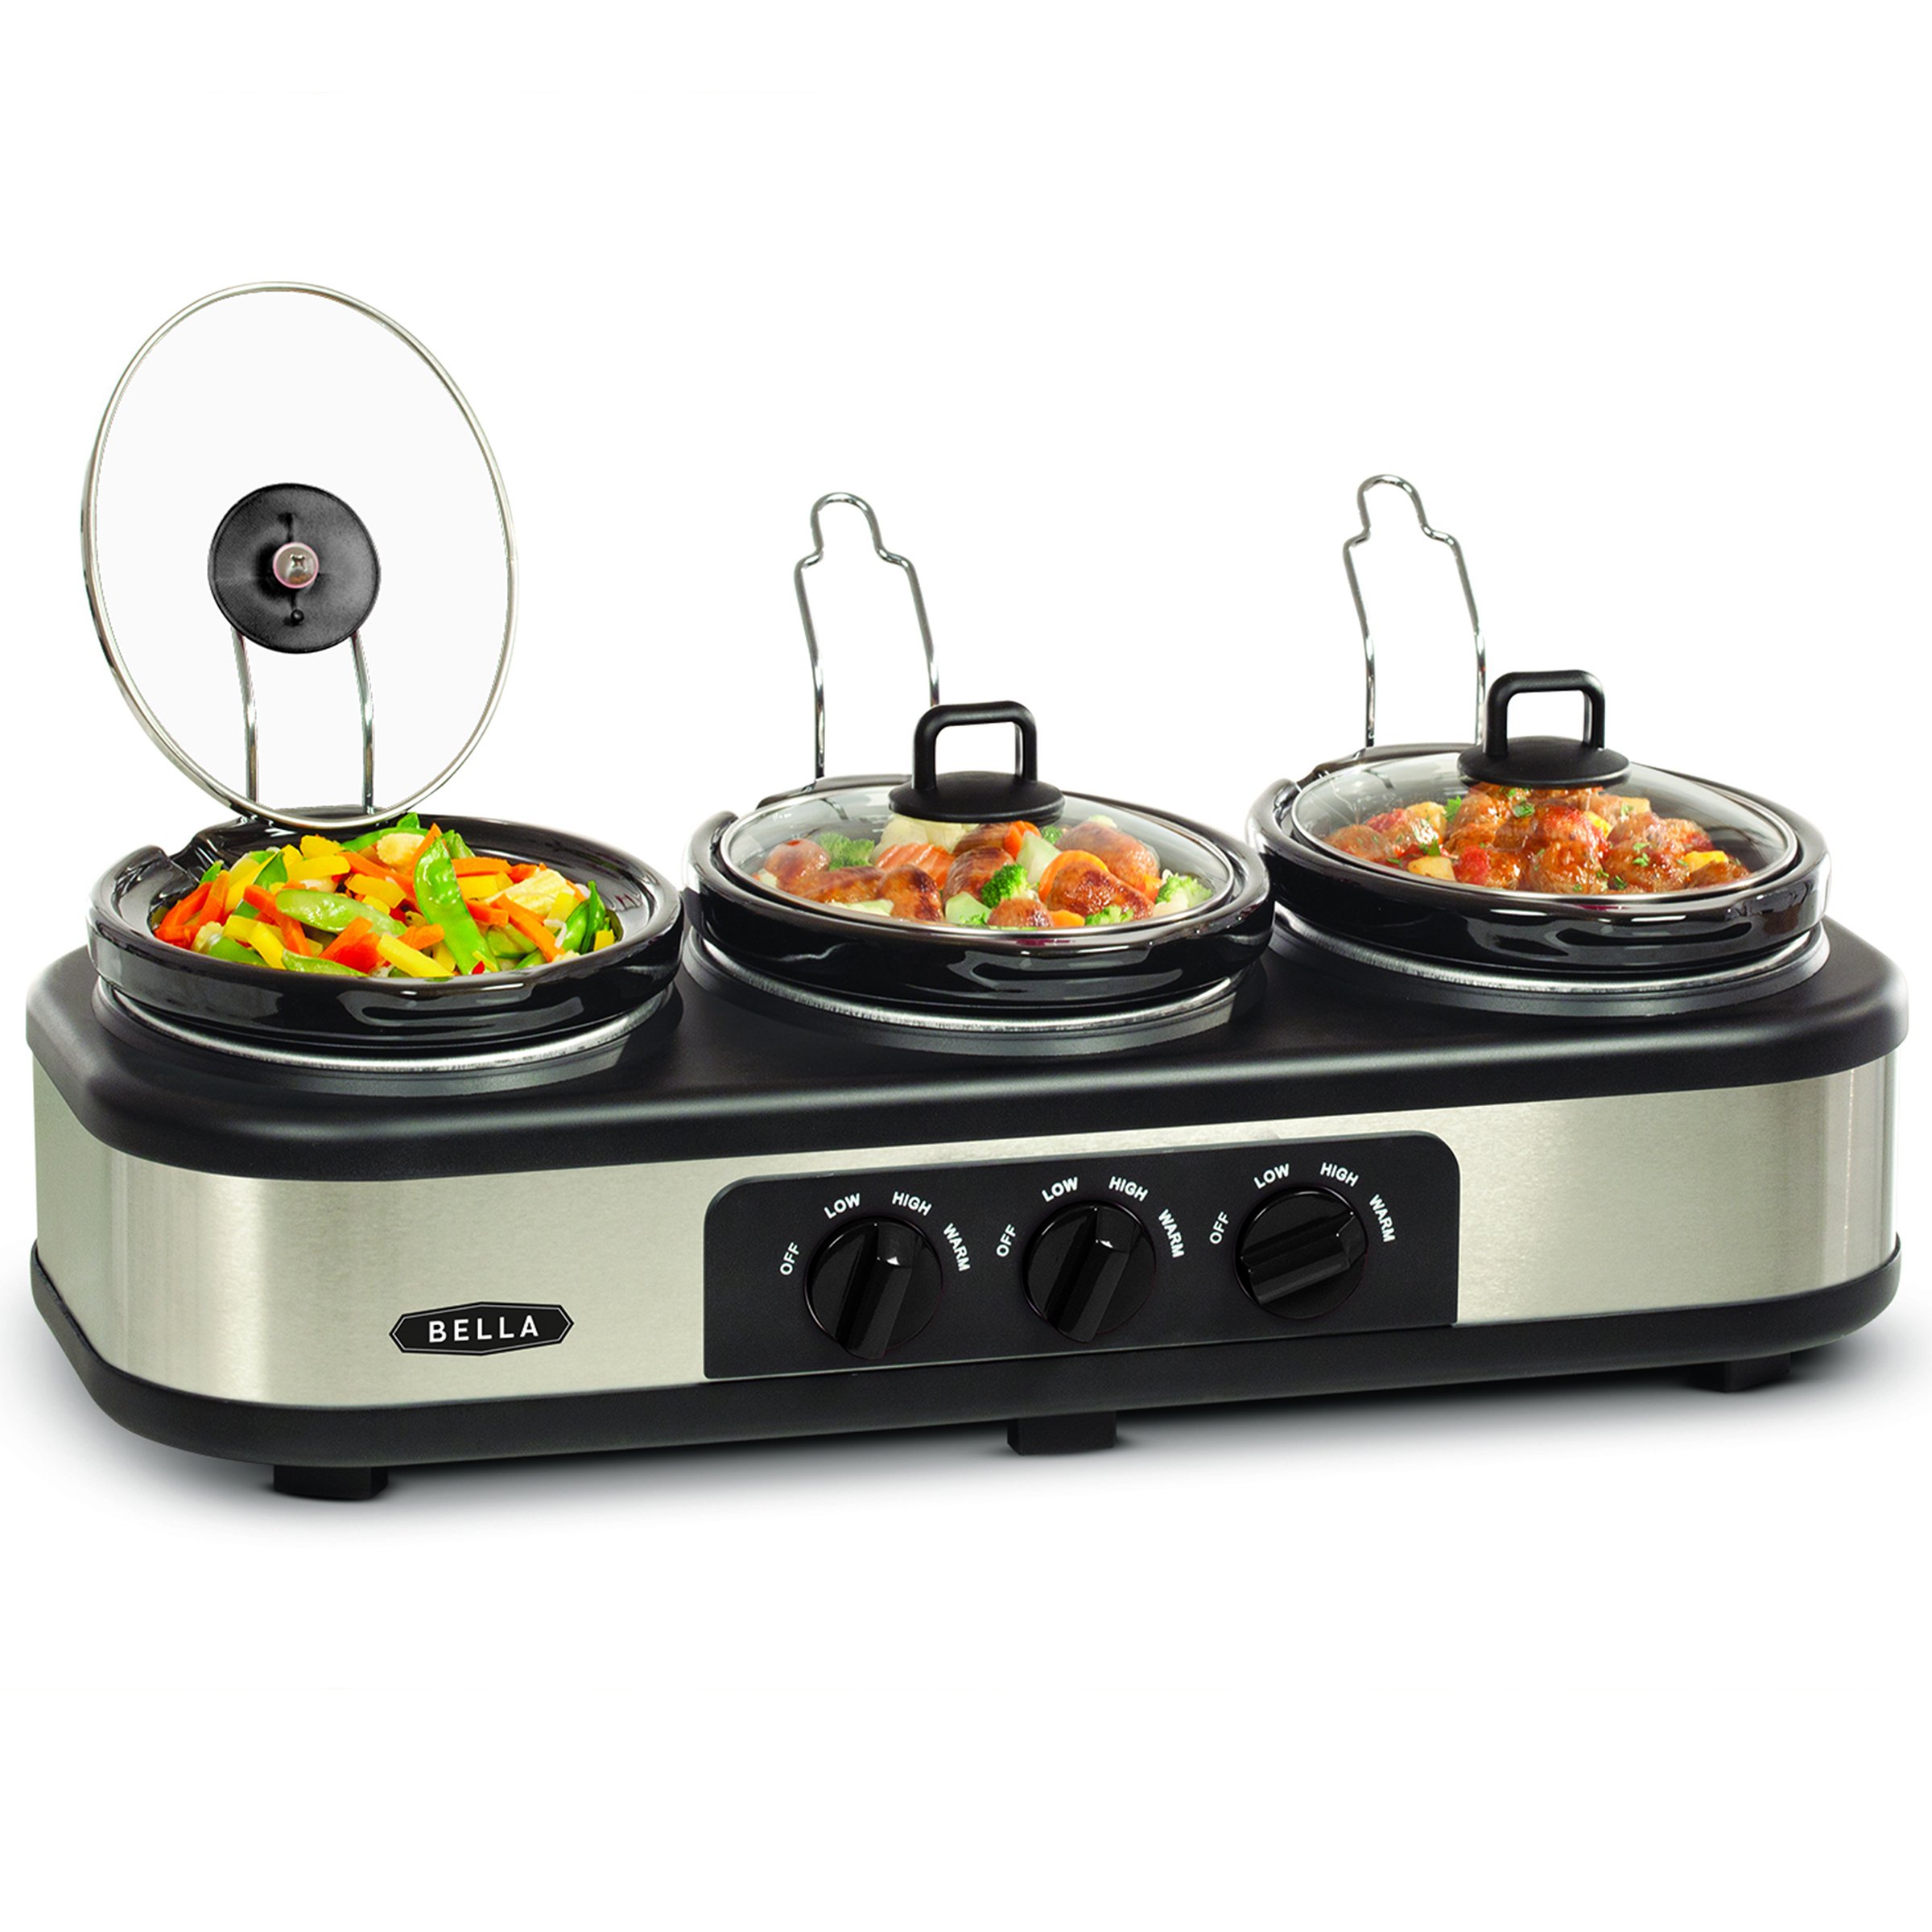 Bella Professional Oval Triple Slow Cooker with Lid Rests - Sam's Club